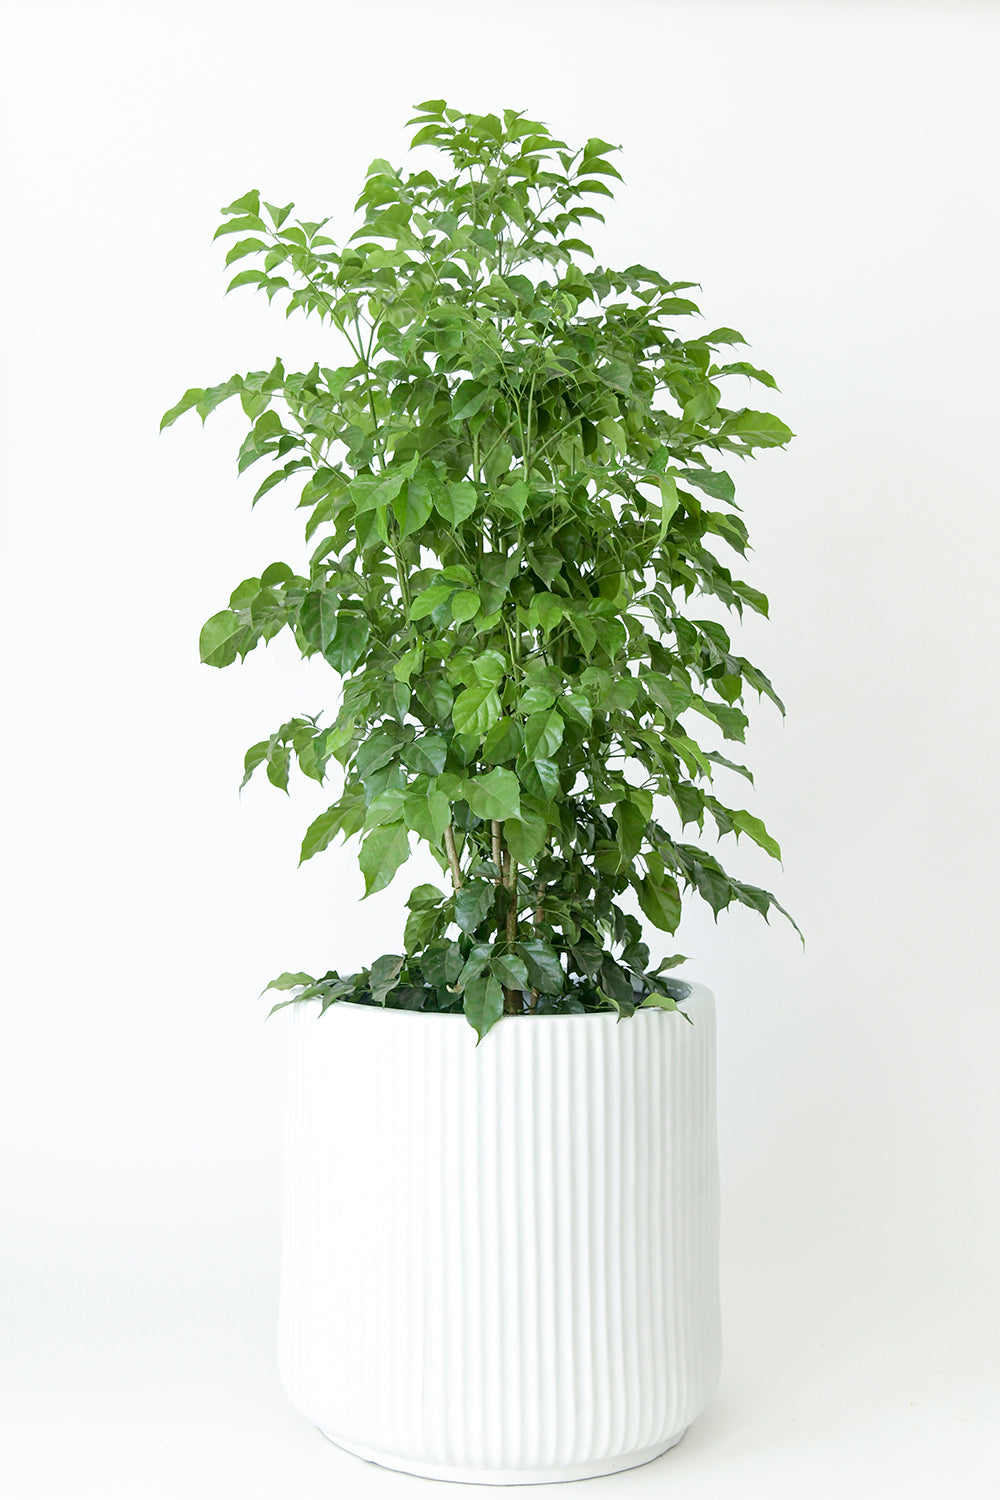 Extra size Pheonix ceramic planter in White color with Ficus plant in it.